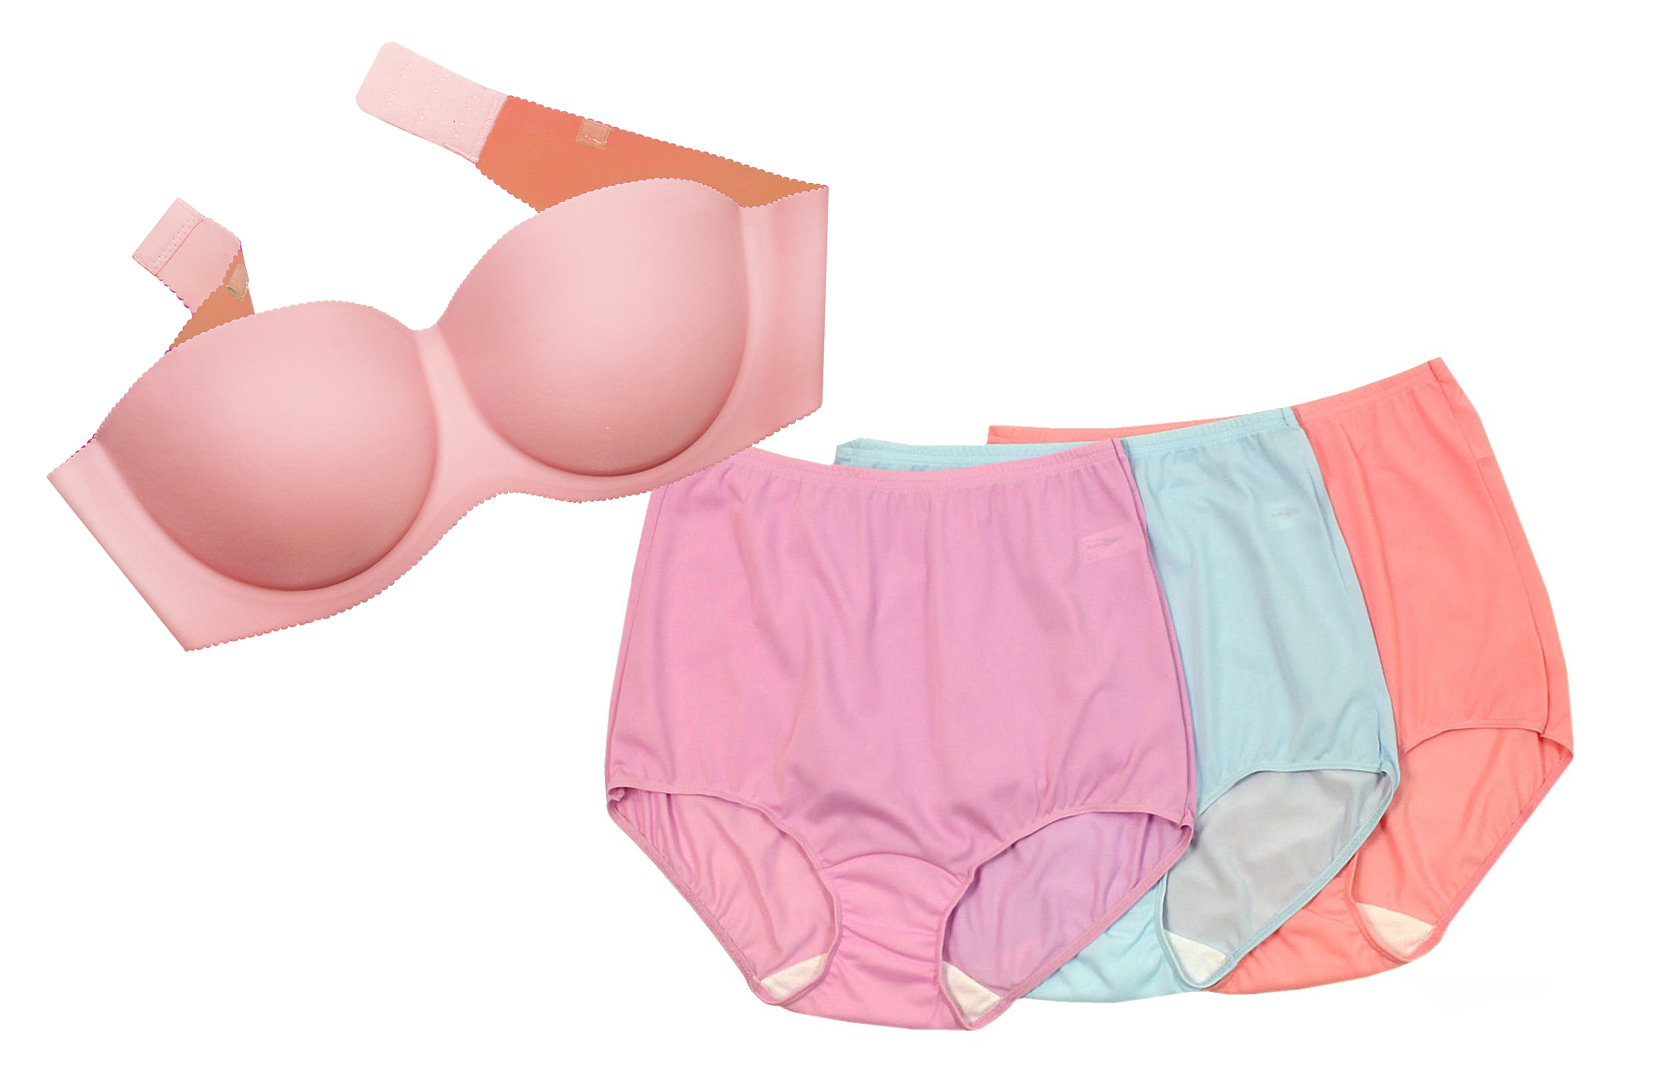 How to Mix-n-Match Bras and Panties - Shadowline & Velrose